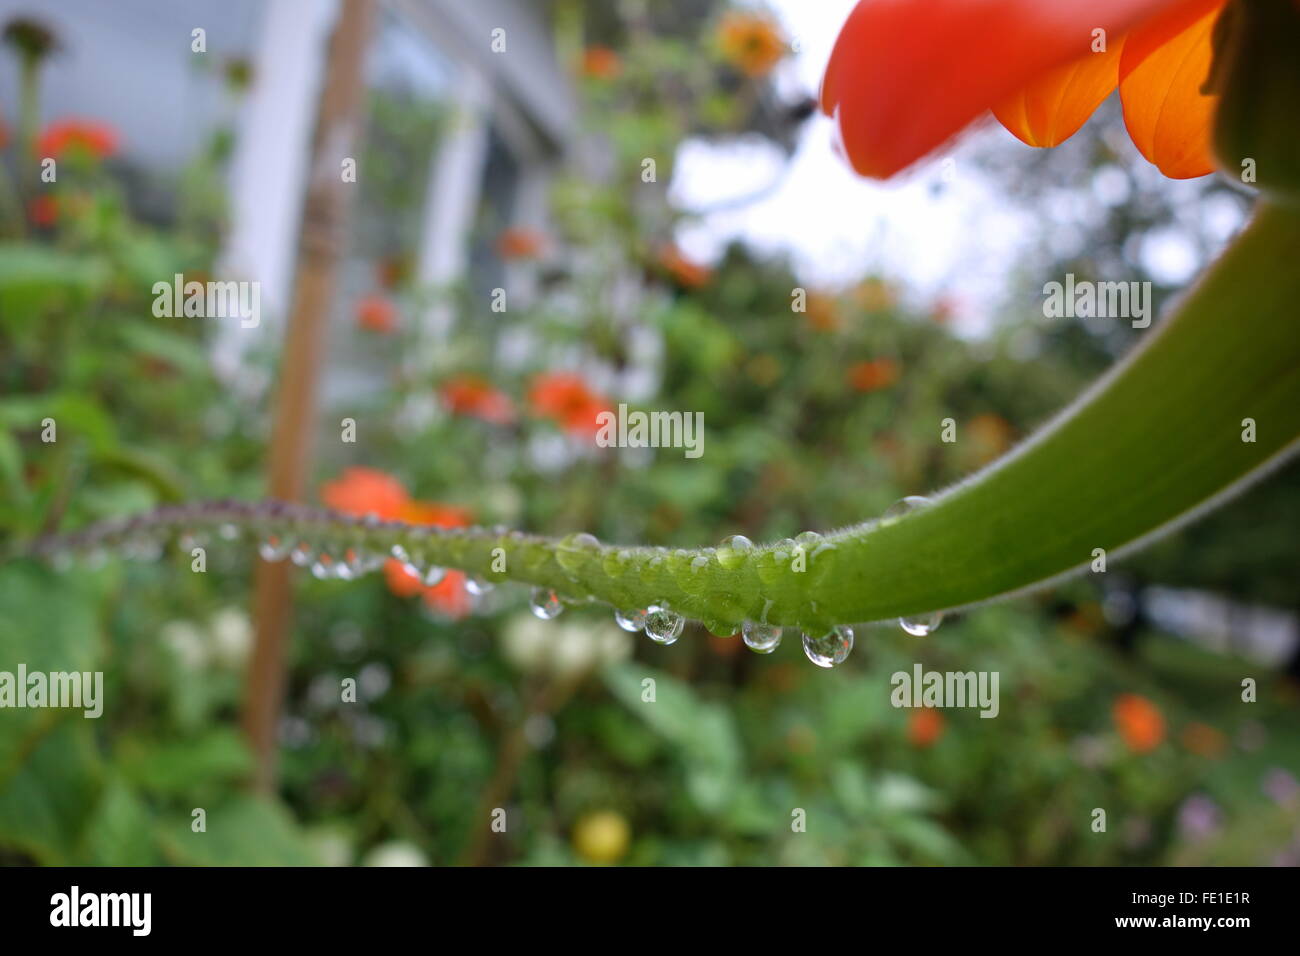 Raindrops on the stem of a Mexican Sunflower (Red Torch) Stock Photo